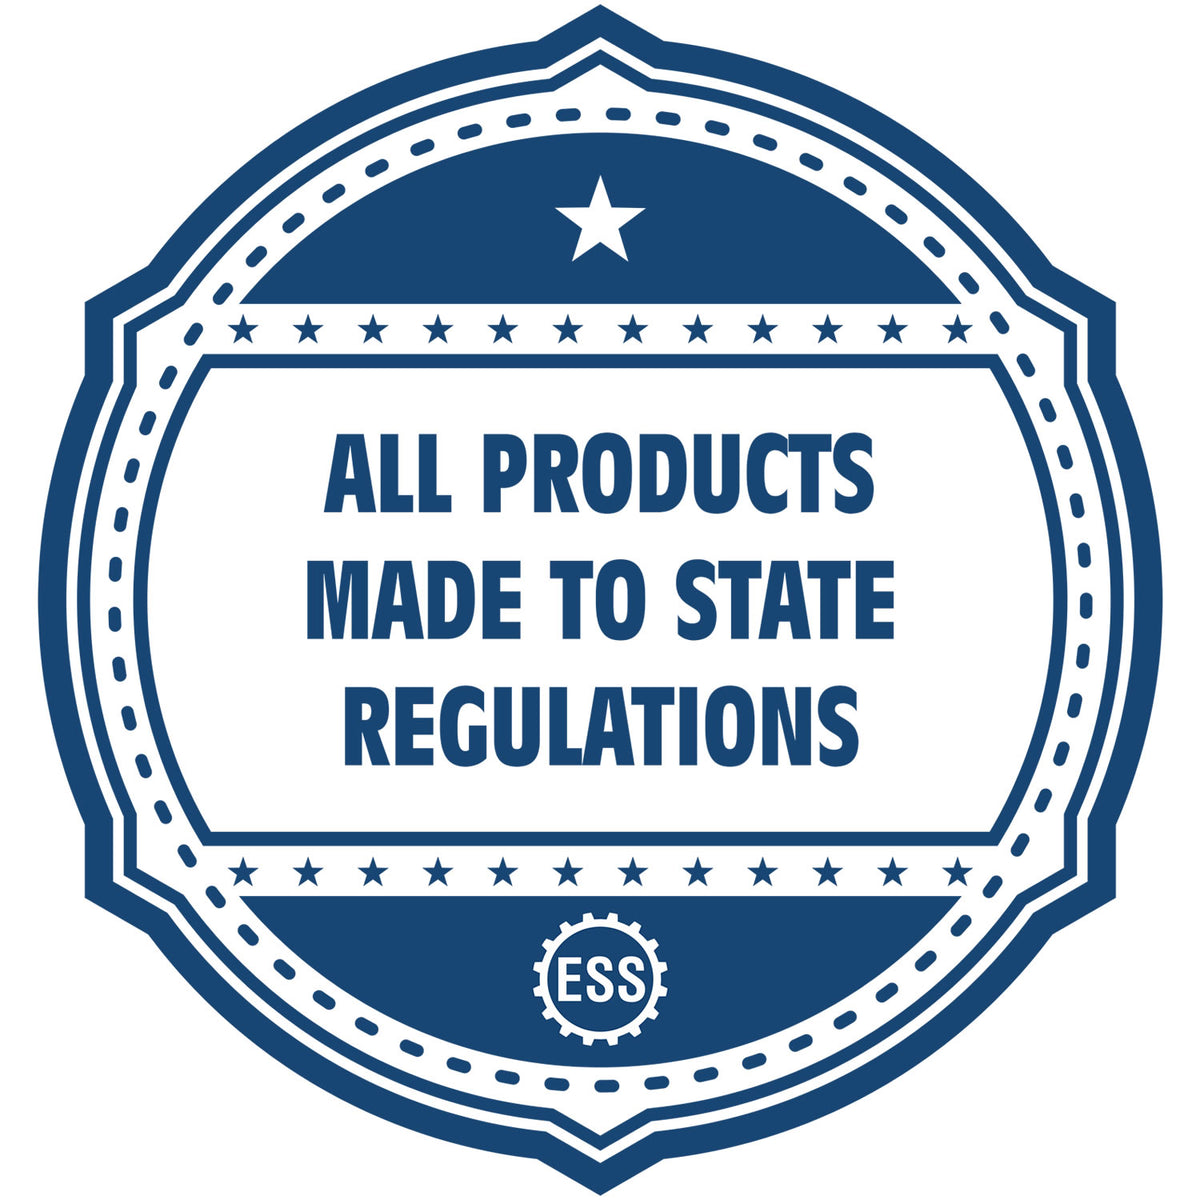 An icon or badge element for the State of Tennessee Extended Long Reach Engineer Seal showing that this product is made in compliance with state regulations.